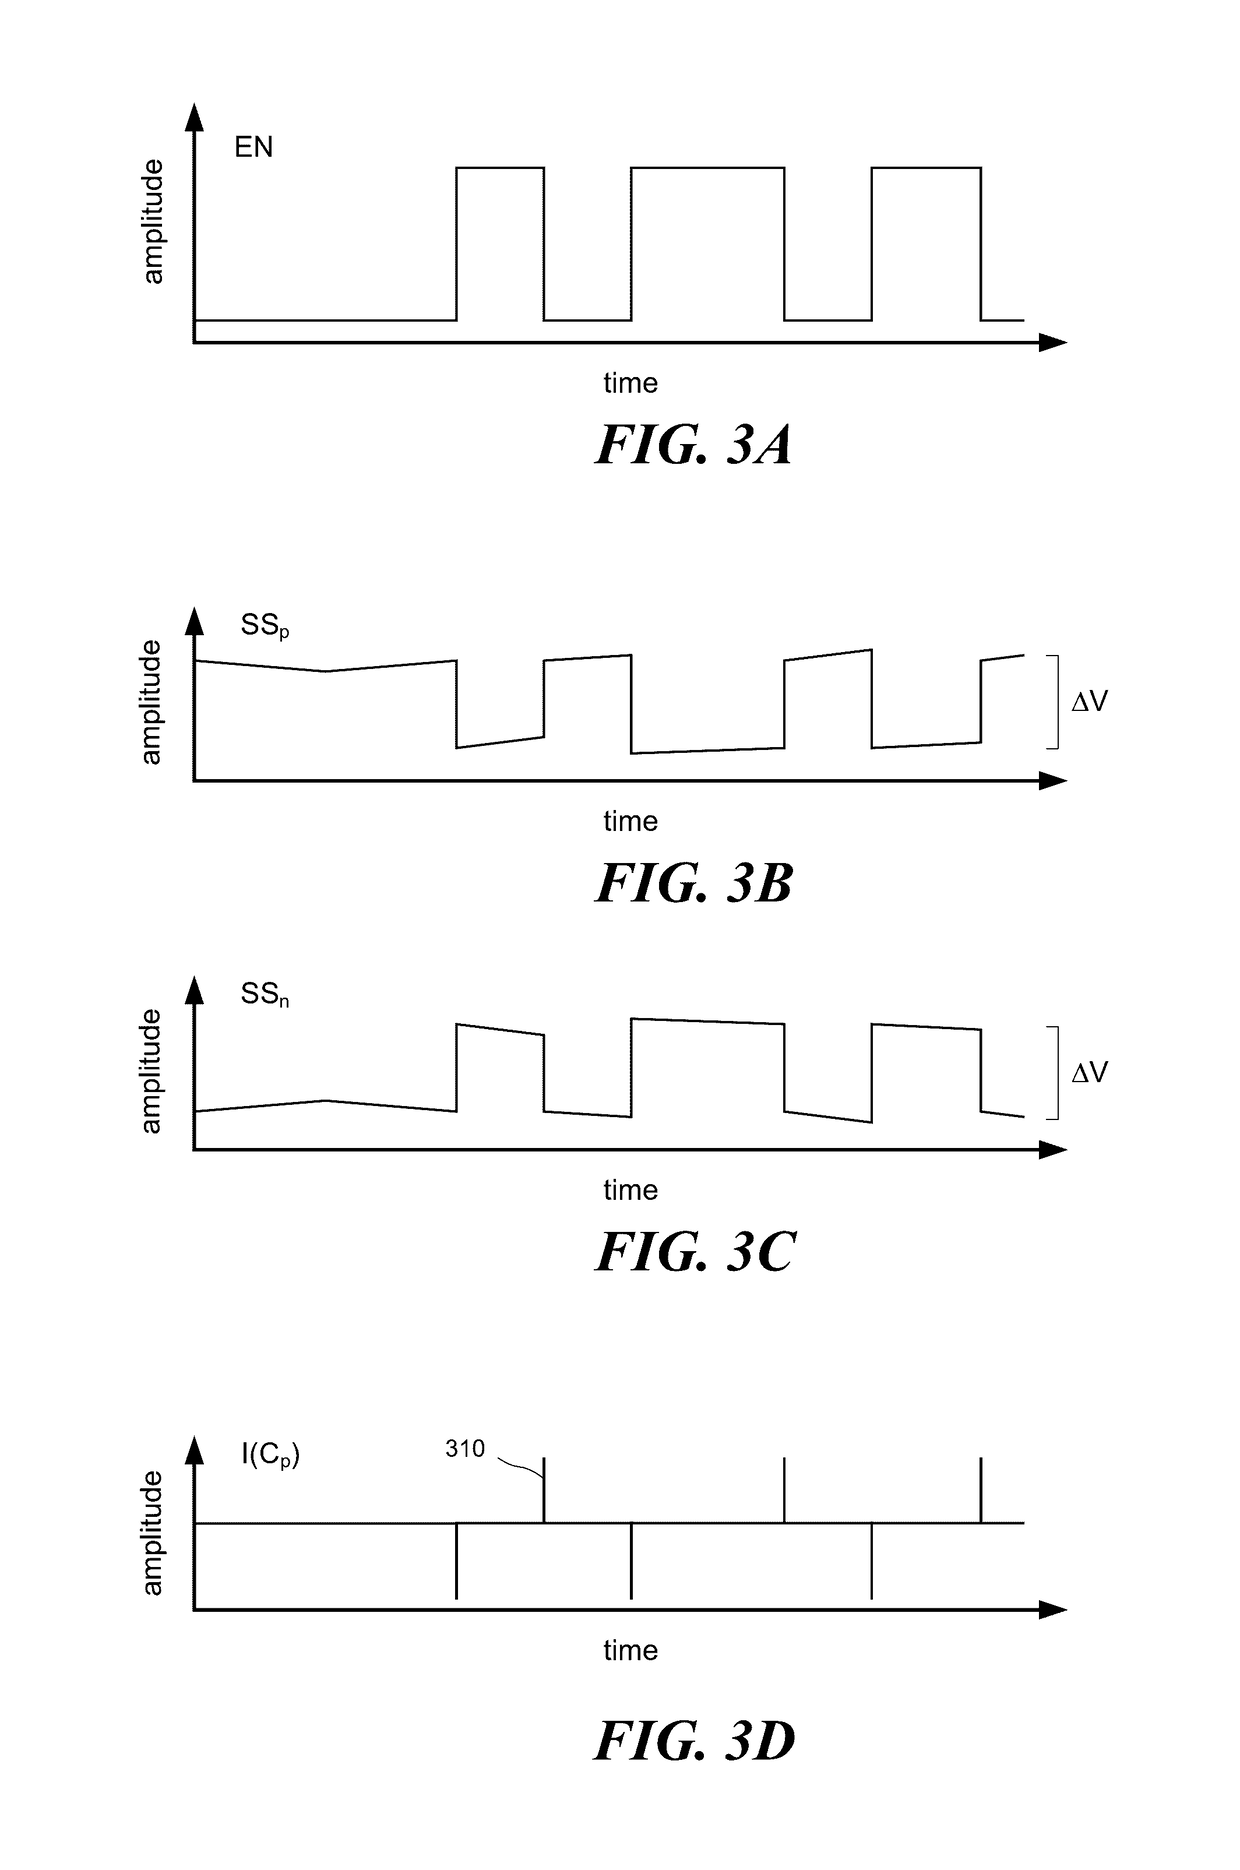 Error cancellation in a current digital-to-analog converter of a continuous-time sigma-delta modulator